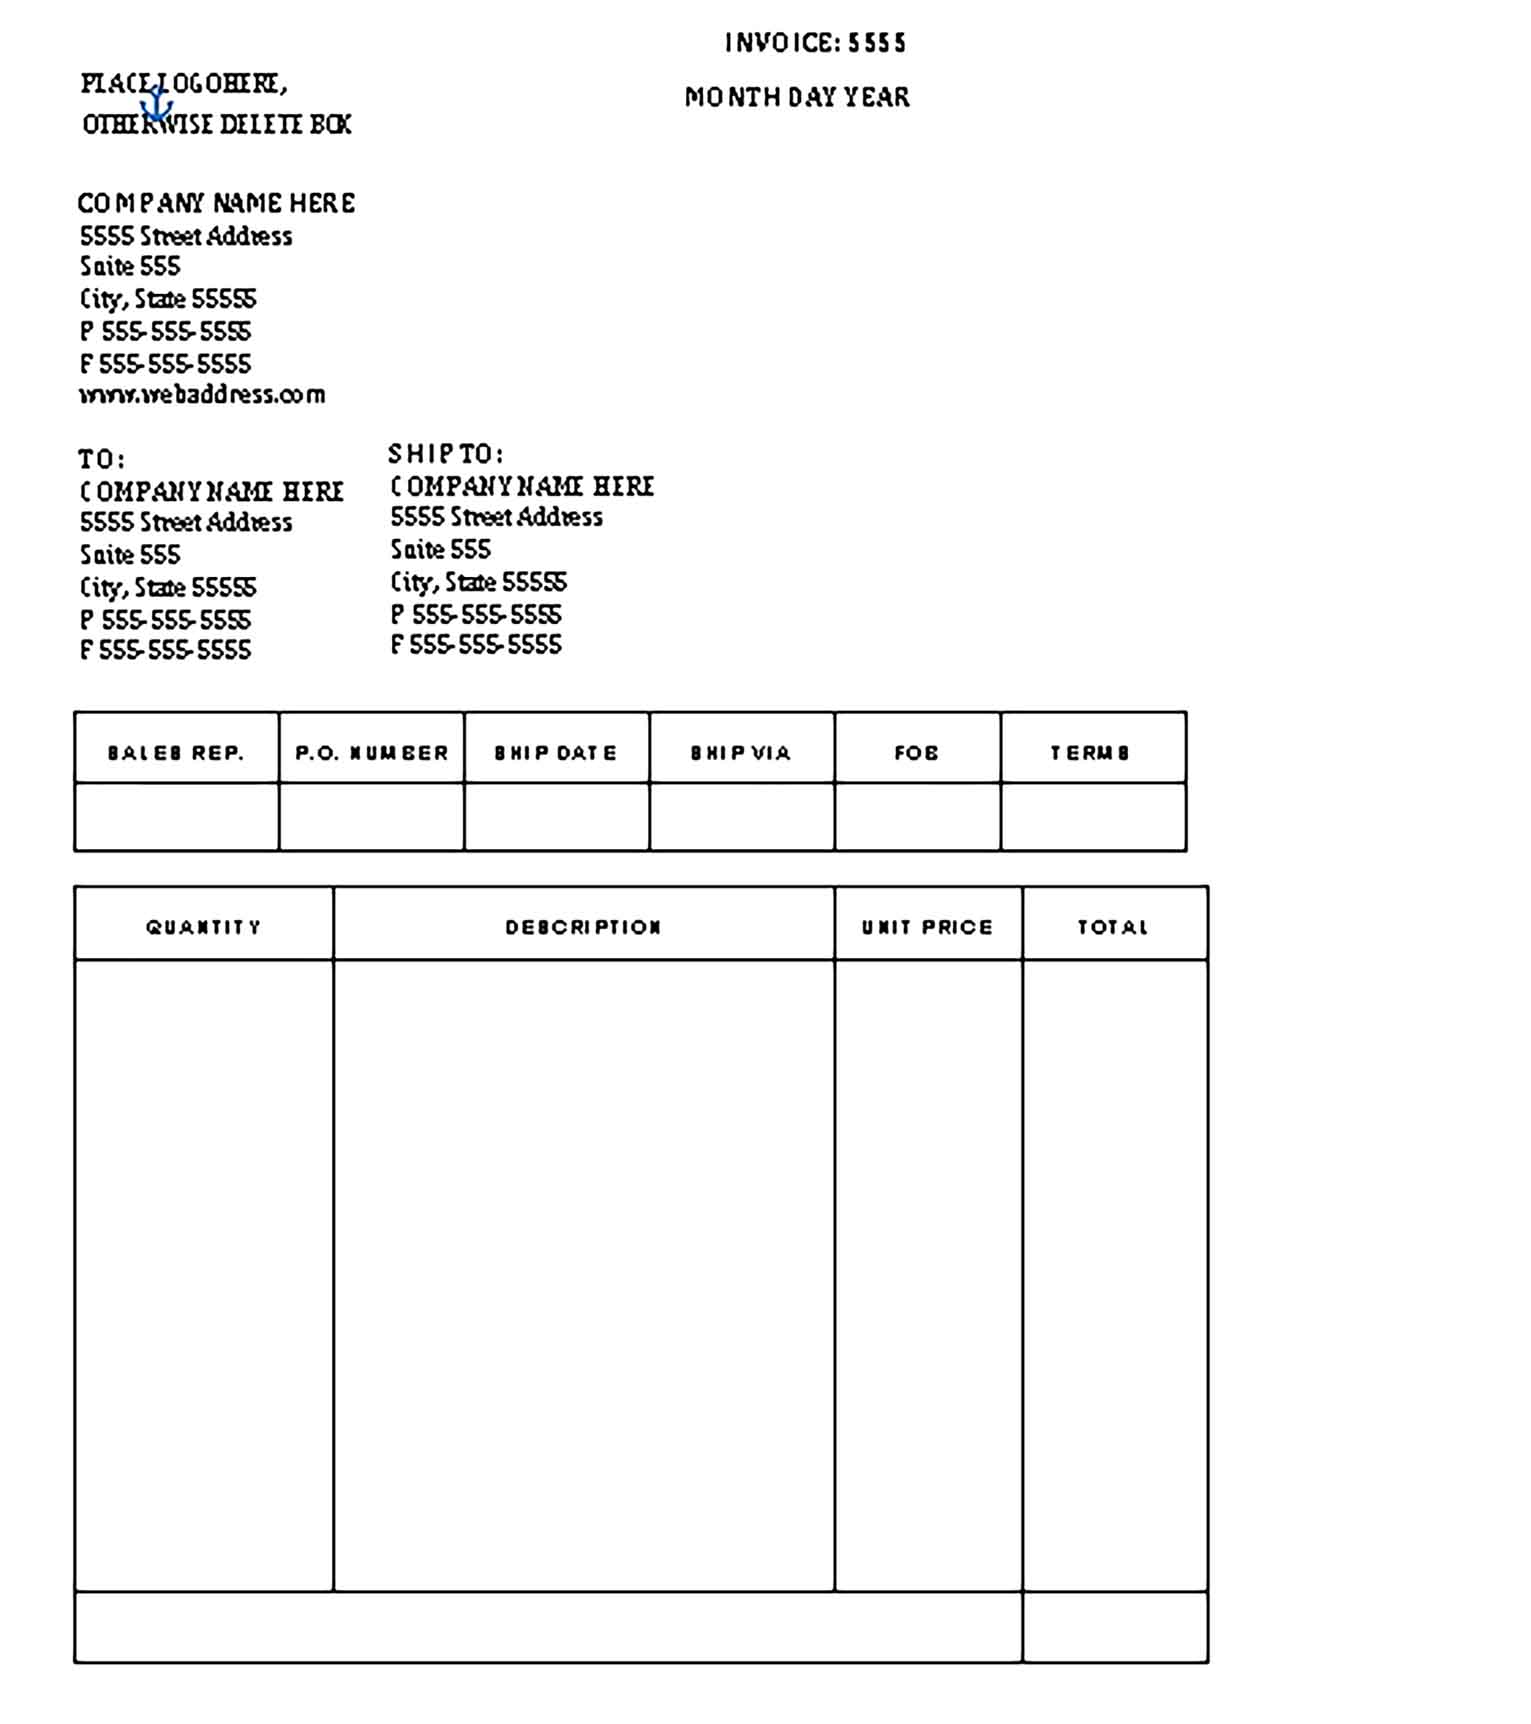 Sample Templates medical invoice word